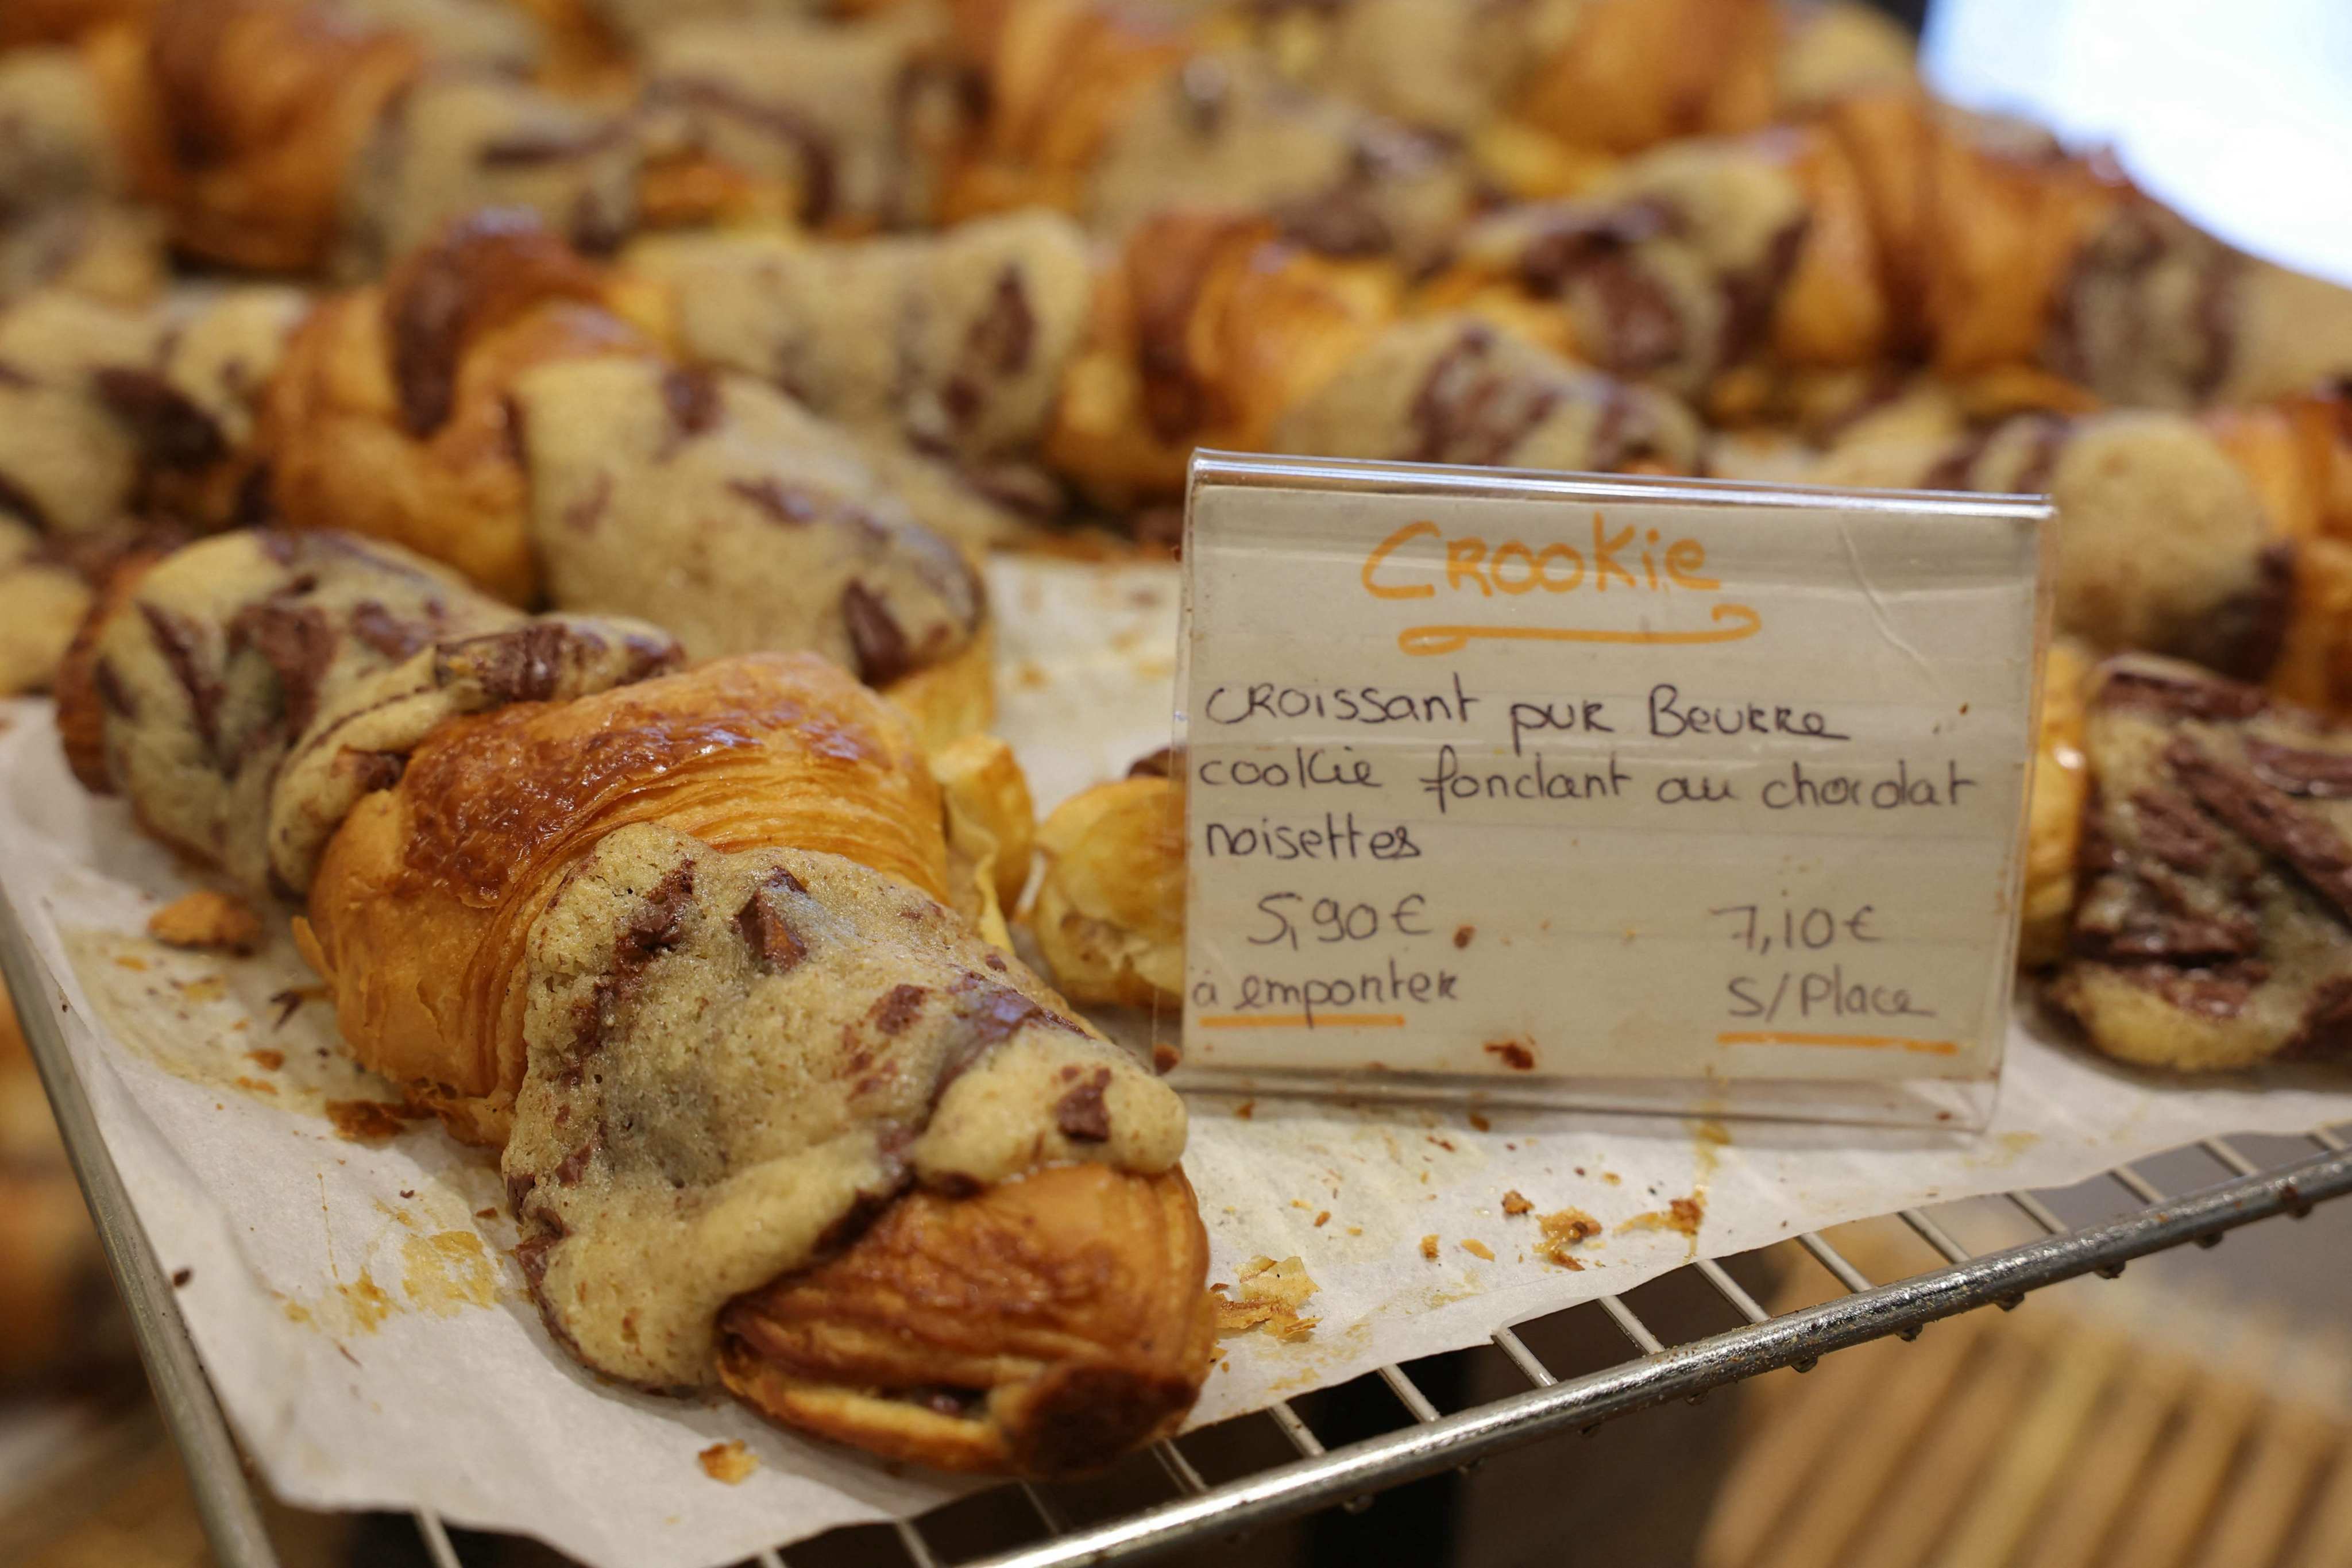 Crookies at Maison Louvard, the Paris pastry shop of creator Stephane Louvard. After going viral on TikTok, the hybrid between a cookie and a croissant has become the latest pastry craze. Photo: AFP